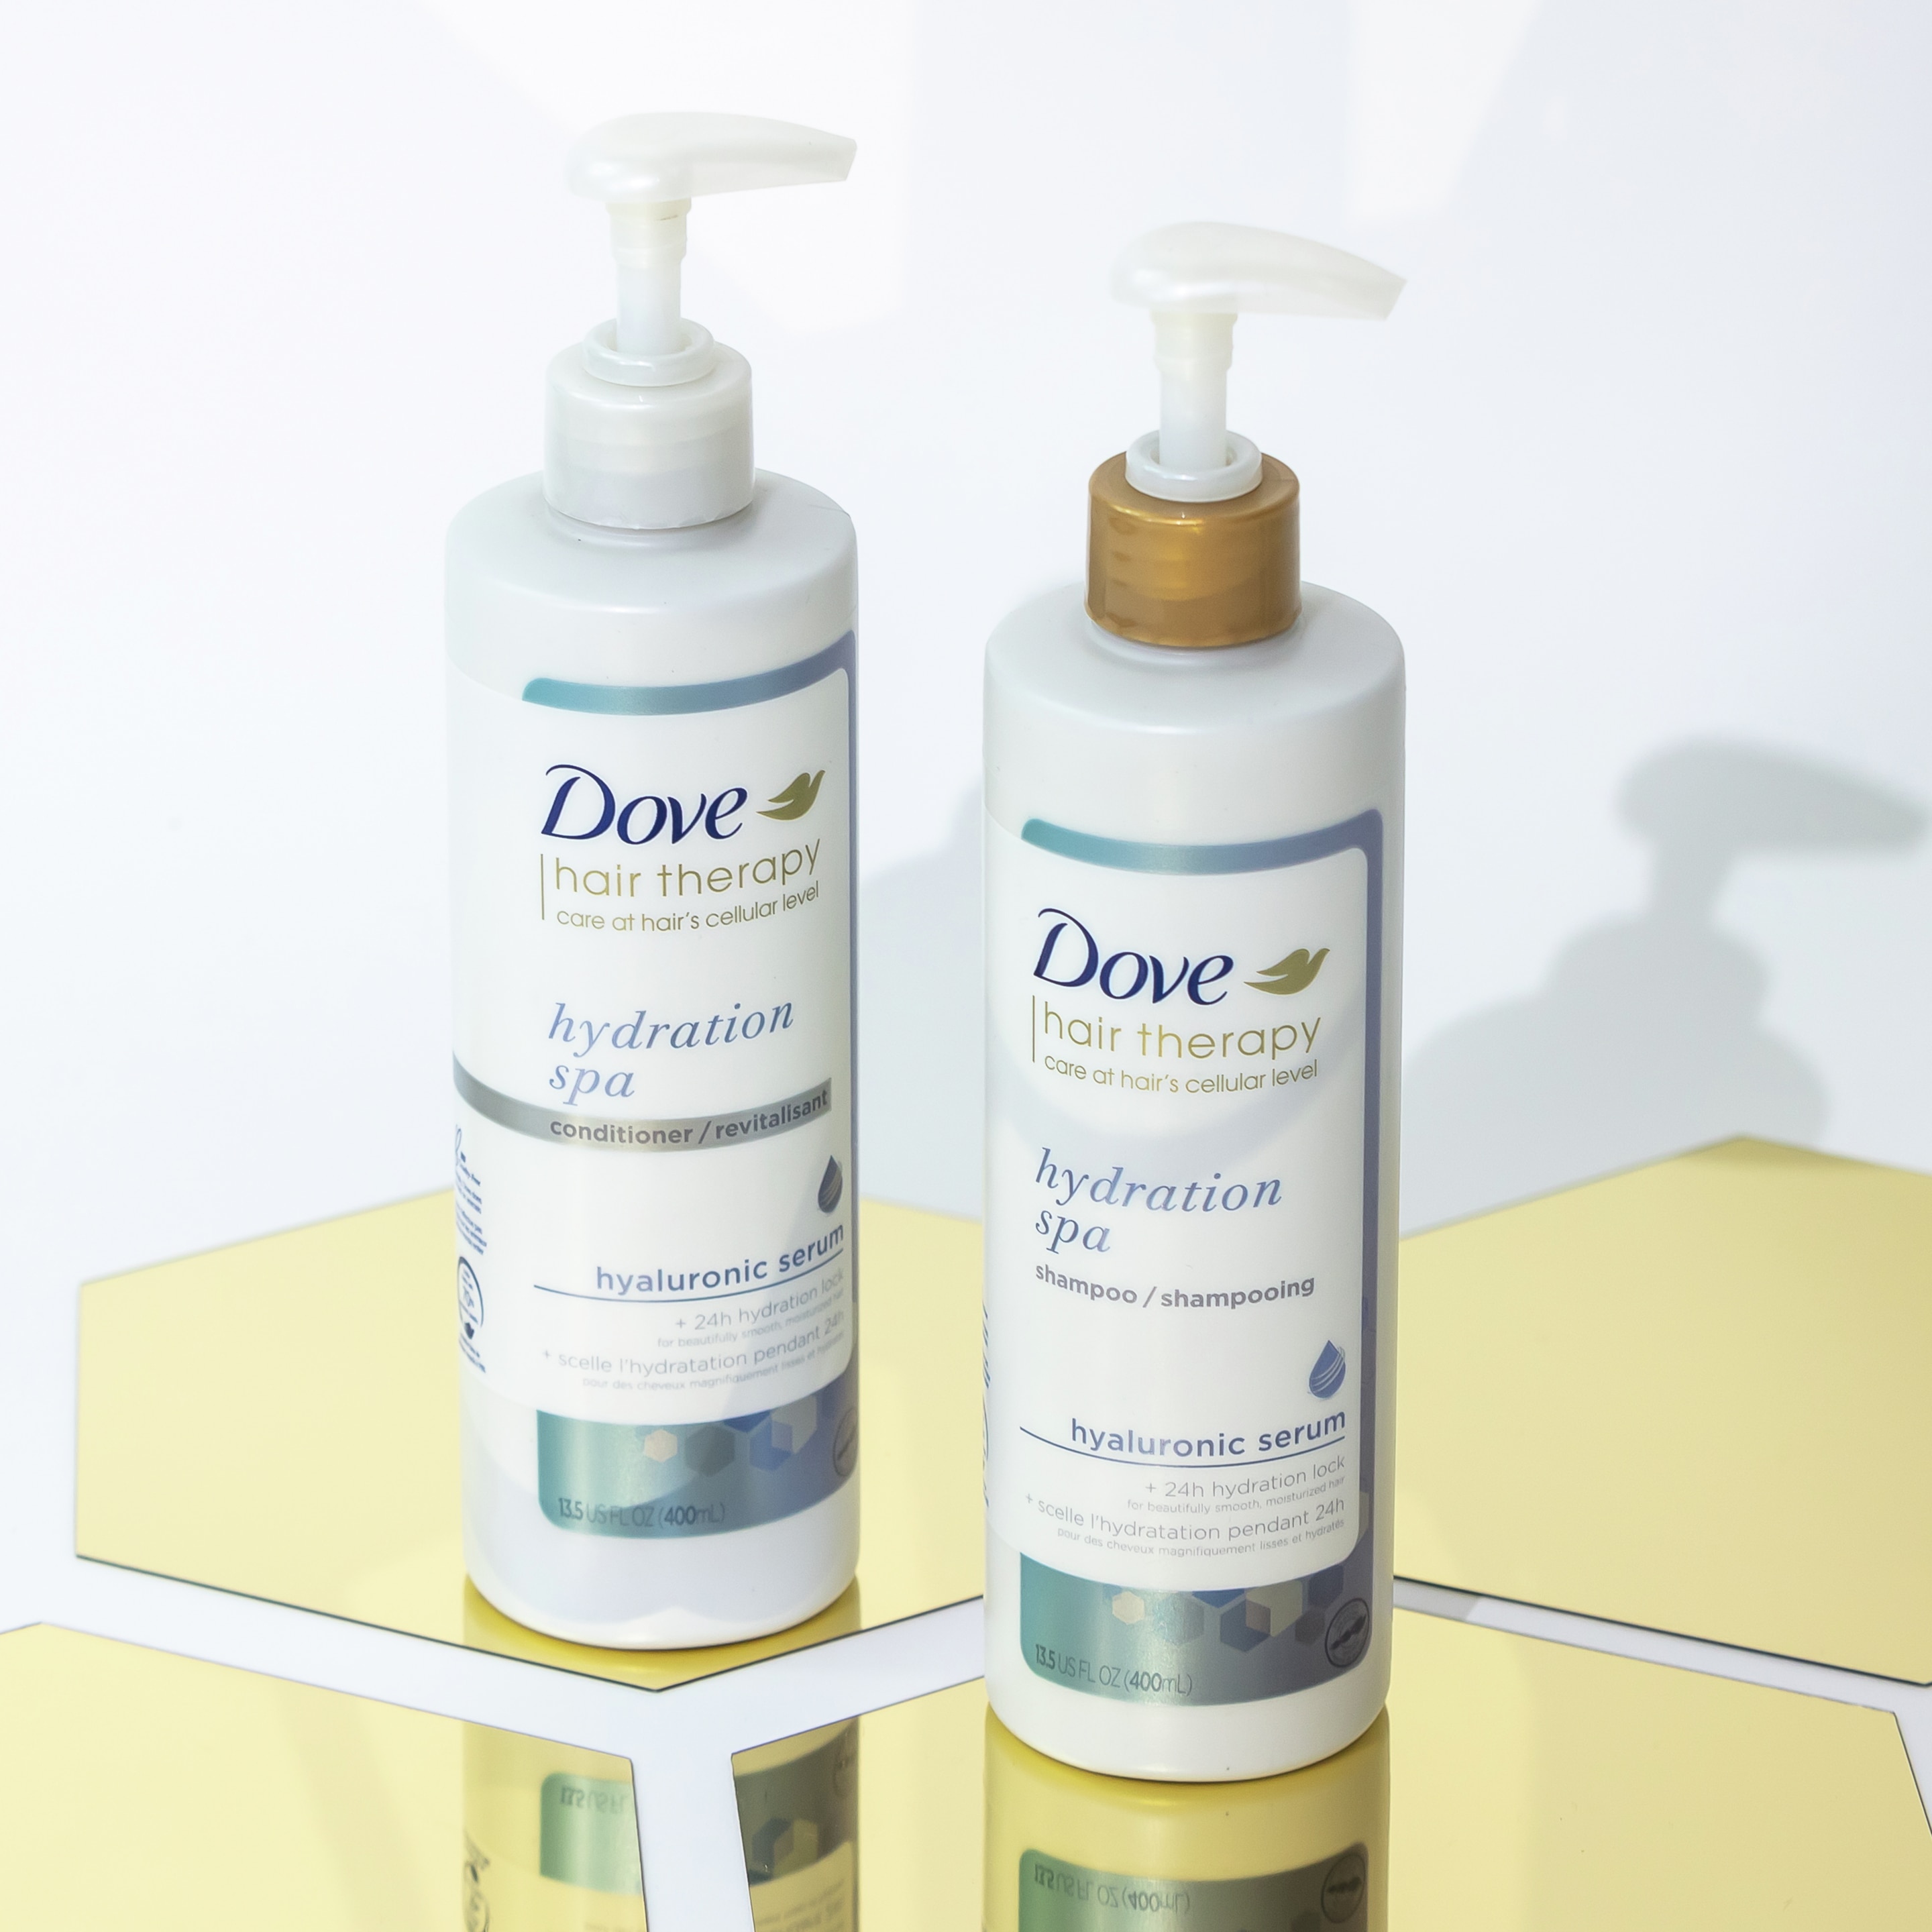 Dove Hair Therapy Hydration Spa Shampoo and Dove Hair Therapy Hydration Spa Conditioner